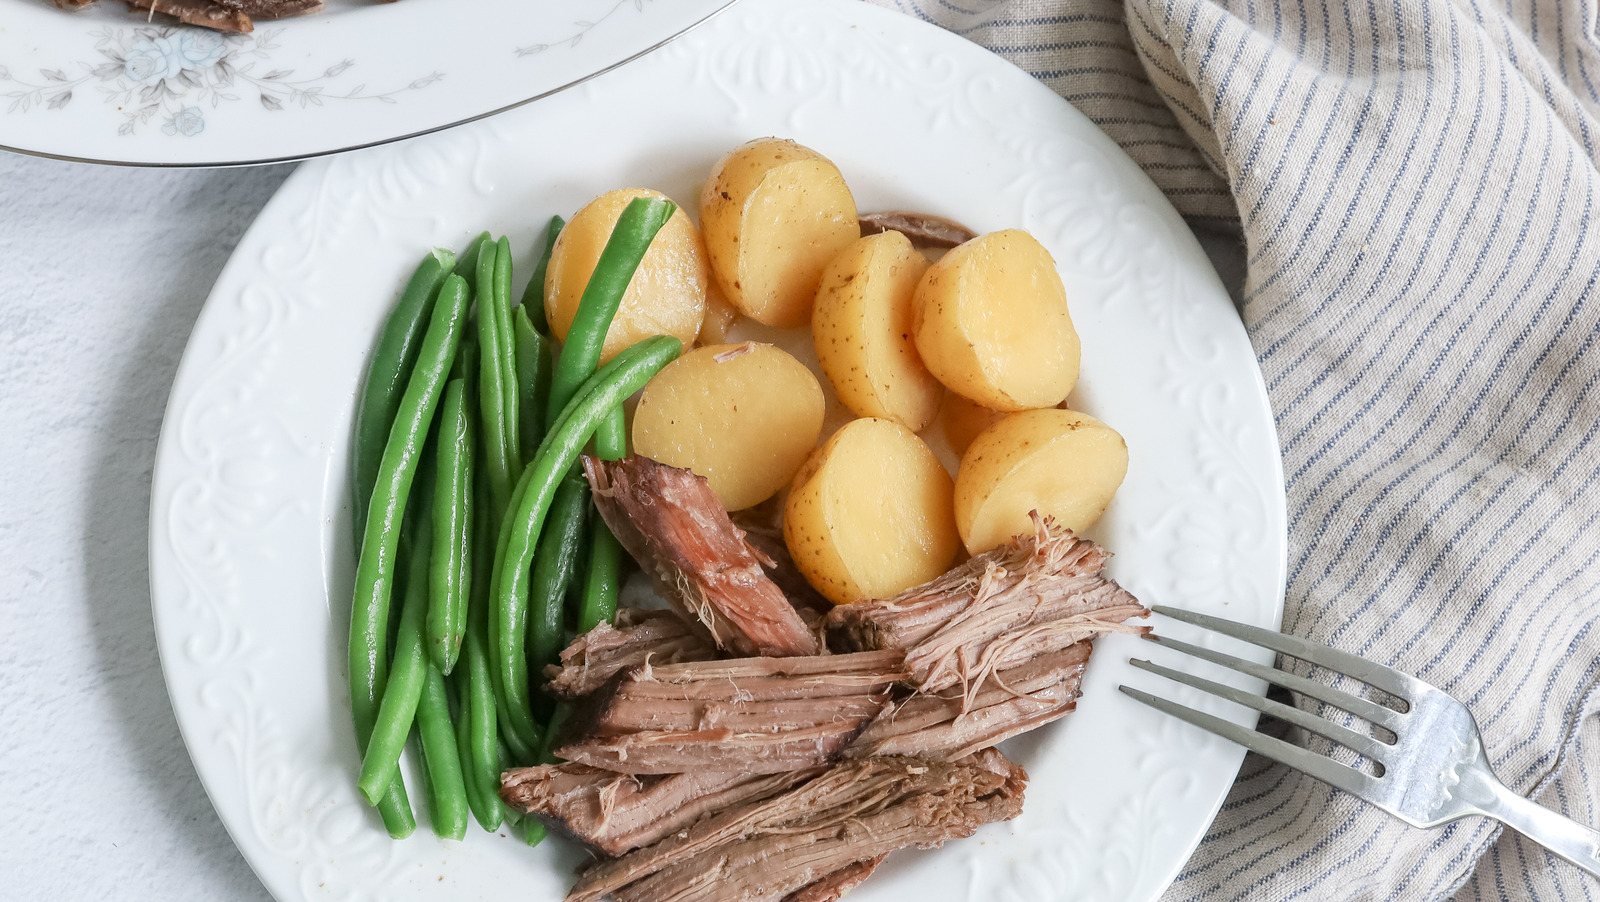 Crockpot London Broil: A Delicious & Effortless Beef Dinner